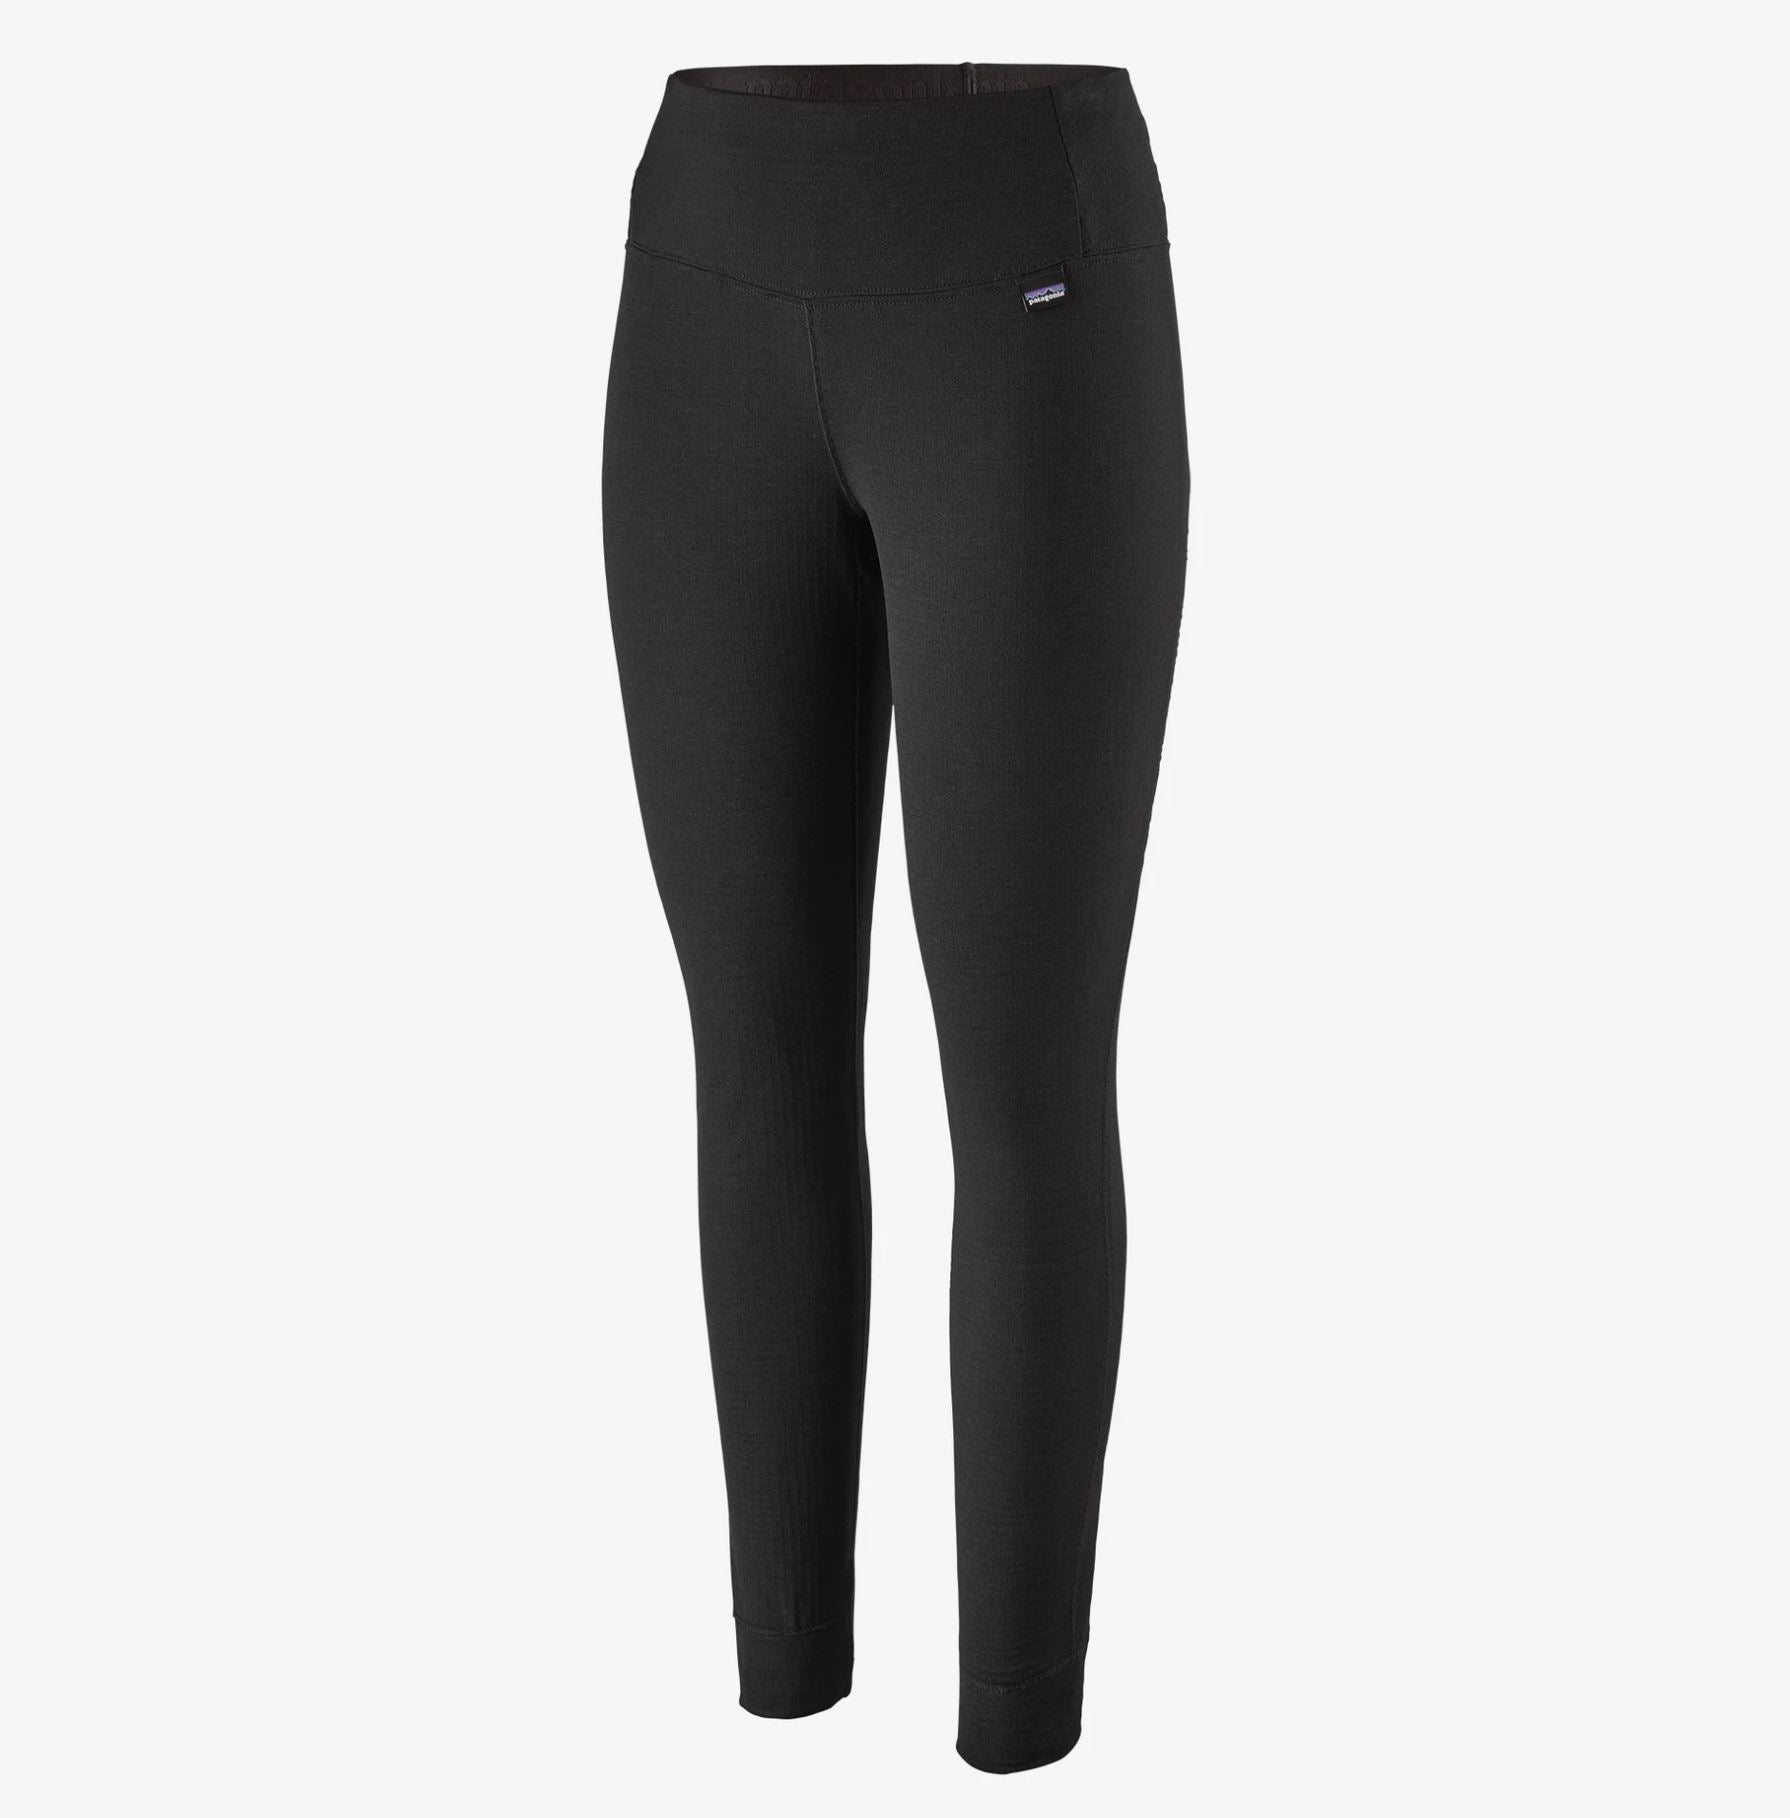 front view of the patagonia womens thermal weight bottoms in black